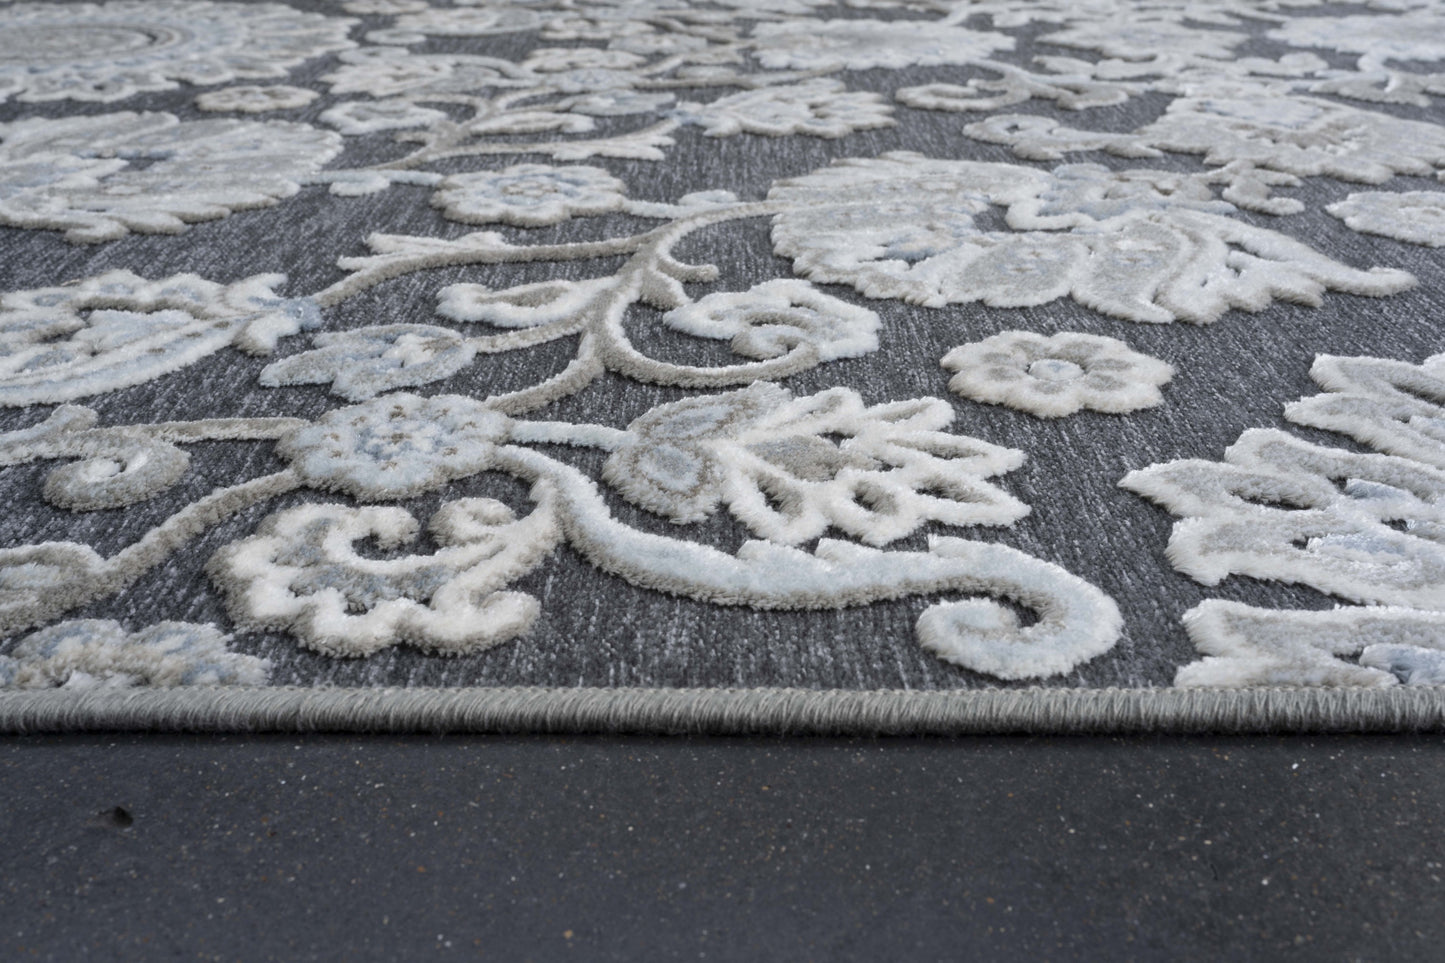 Lily Gray, Ivory, Blue Chenille and Viscose High - Low Area Rug